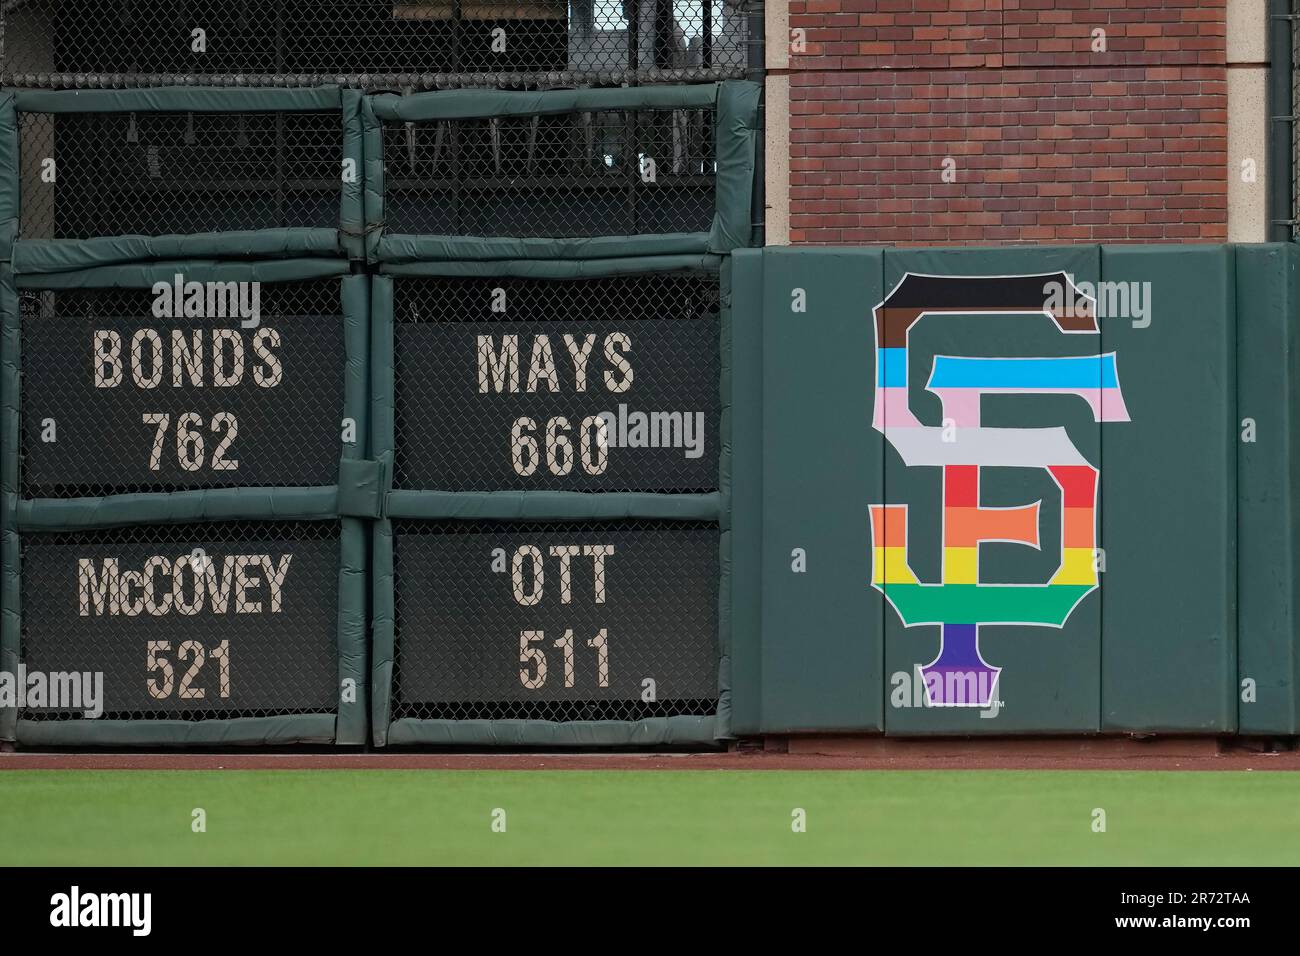 SF Giants to become 1st MLB team to wear rainbow Pride uniforms 